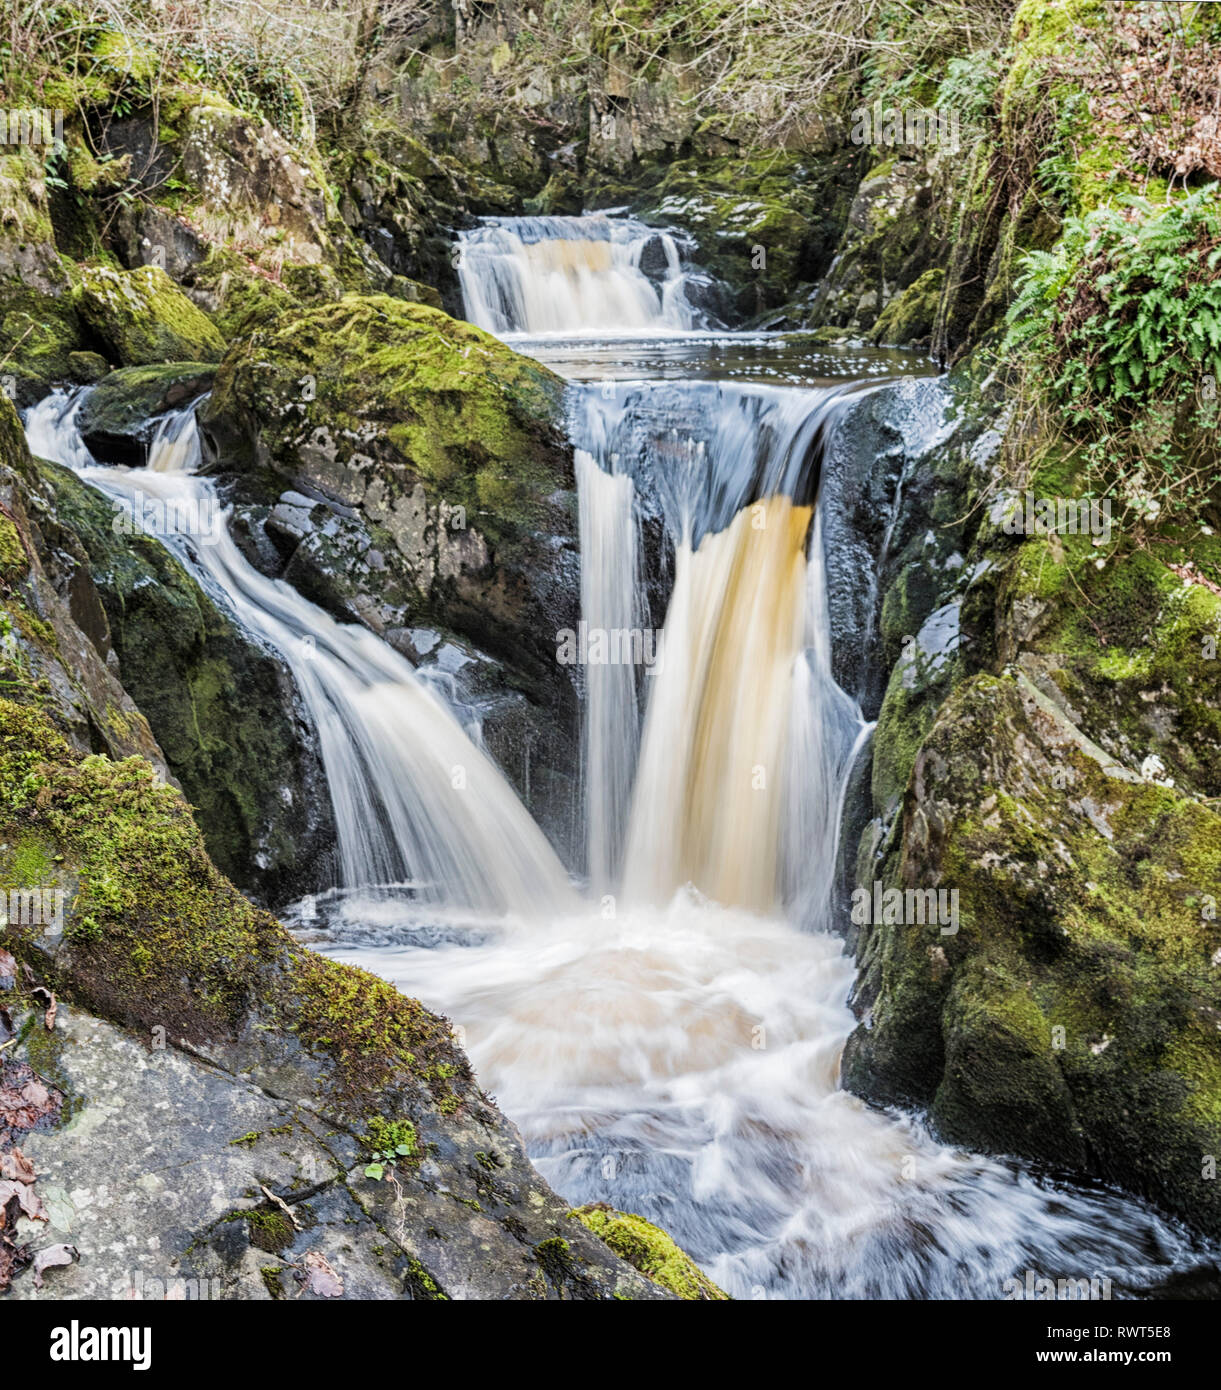 Multiple levels of the Pecca falls on the popular Ingleton waterfall trail in the North Yorkshire Dales England UK. Stock Photo